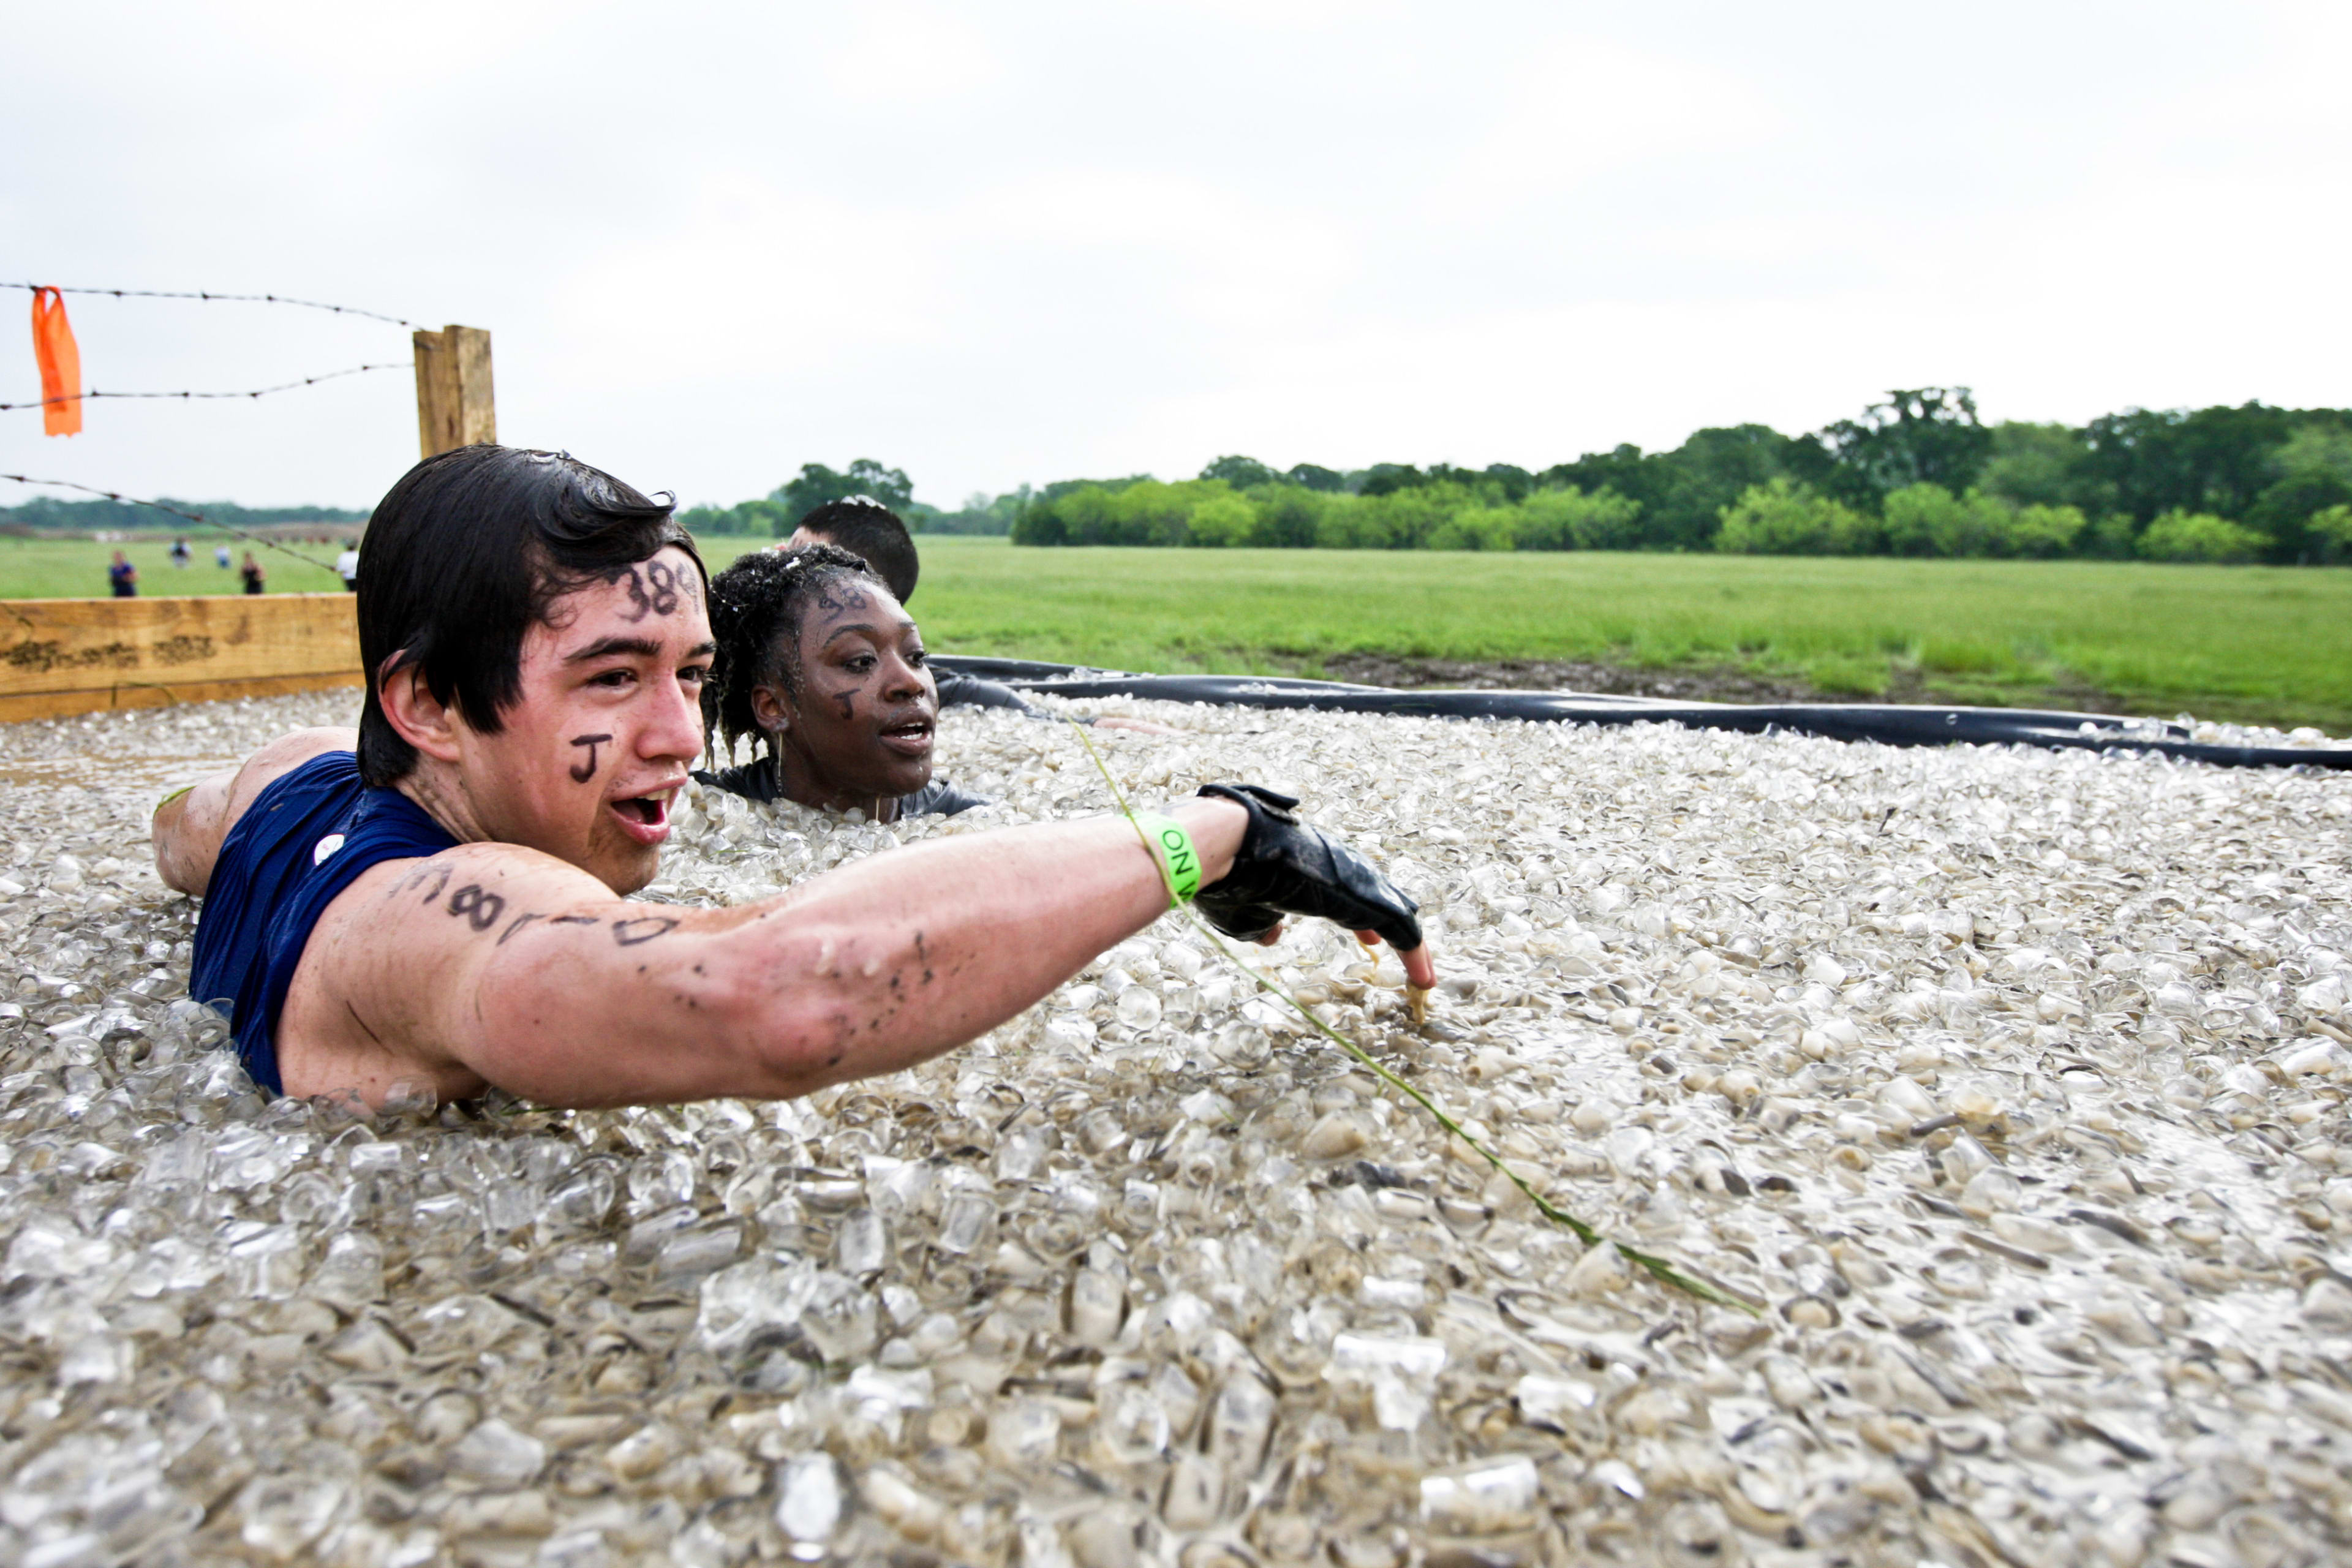 Tough Mudder Dallas/Ft. Worth Obstacle in Midlothian — Let’s Do This